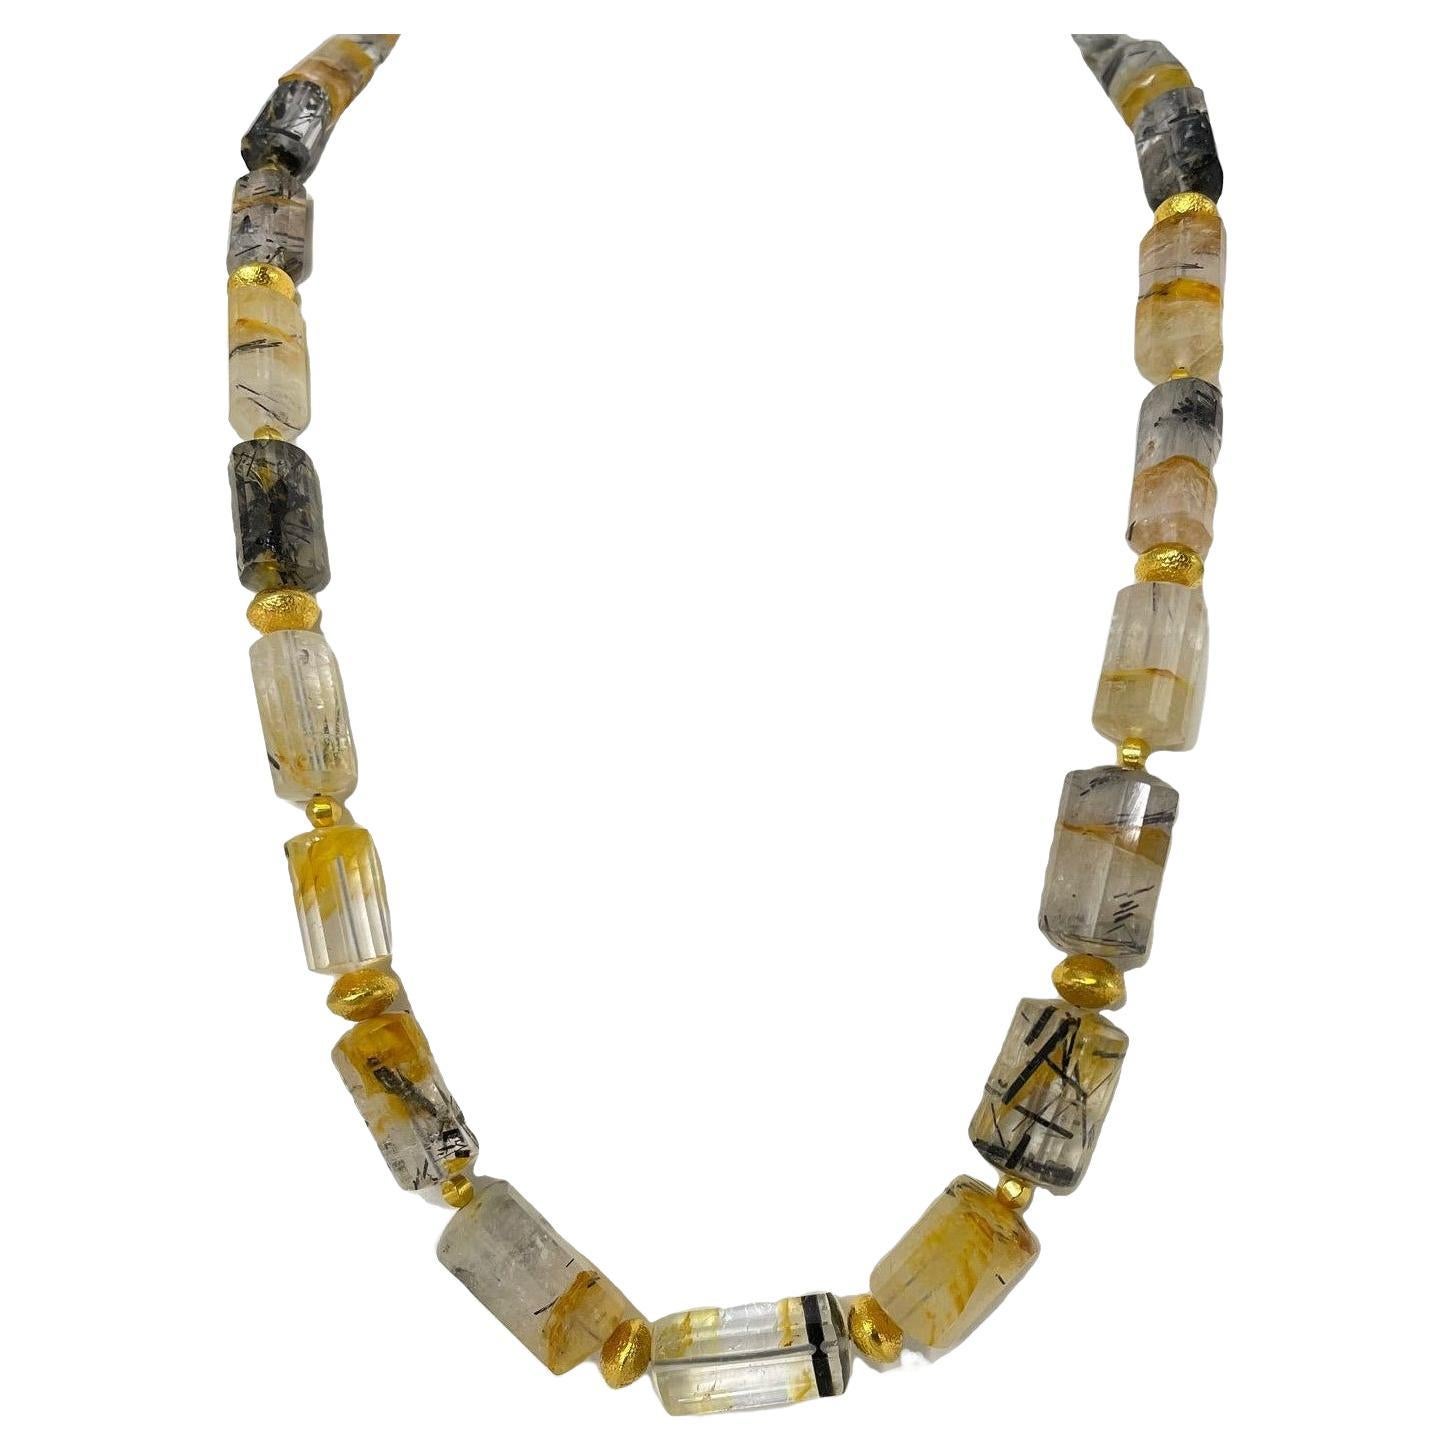 Faceted Rutilated Quartz Bead Necklace with Yellow Gold Accents and Clasp